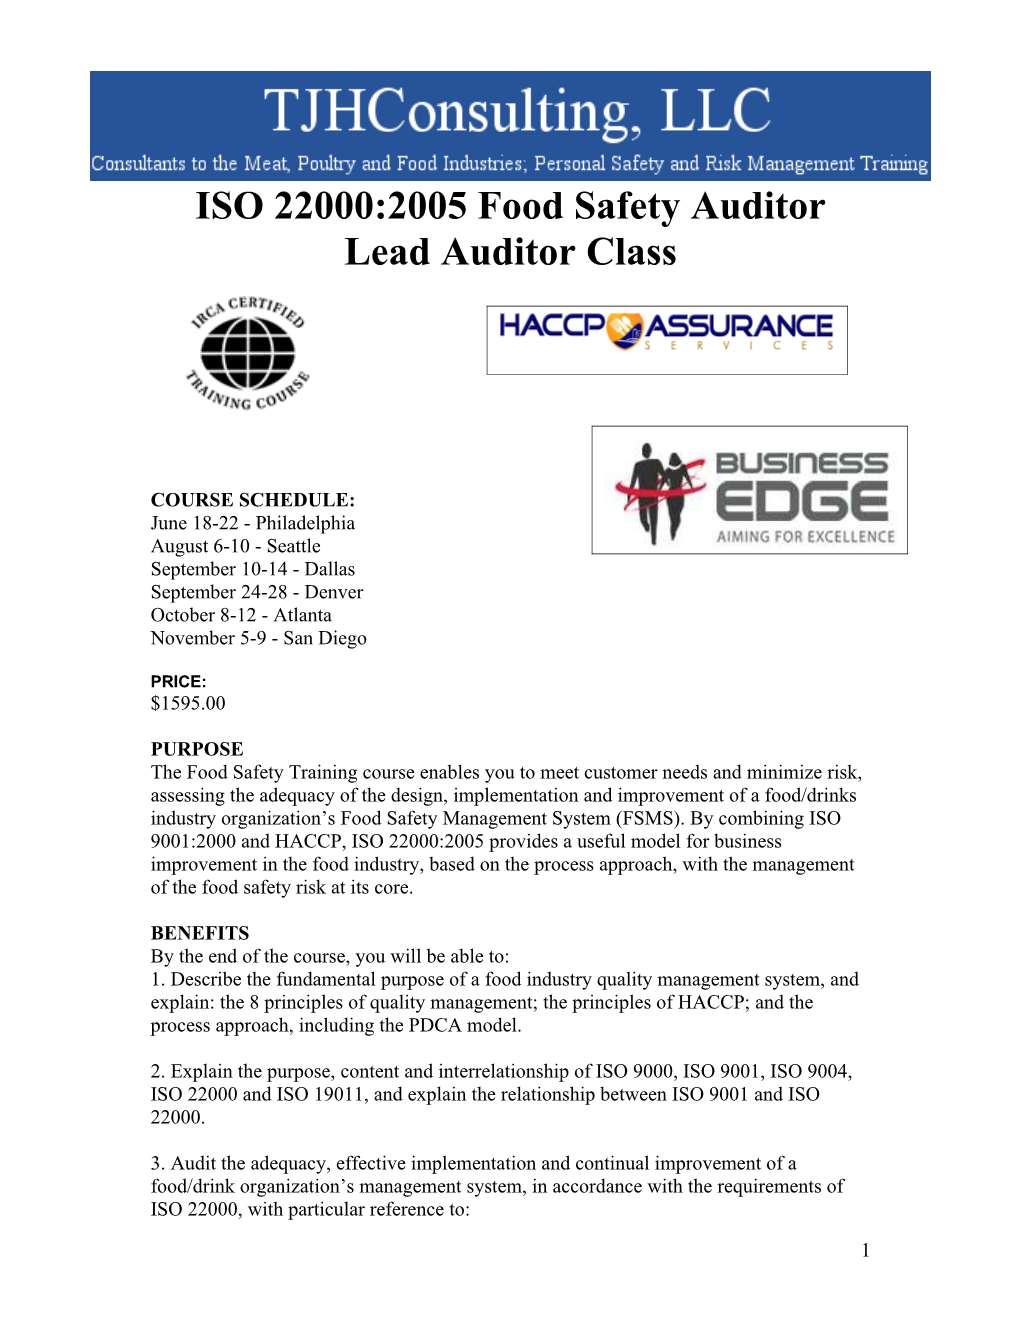 ISO 22000:2005 Food Safety Auditor